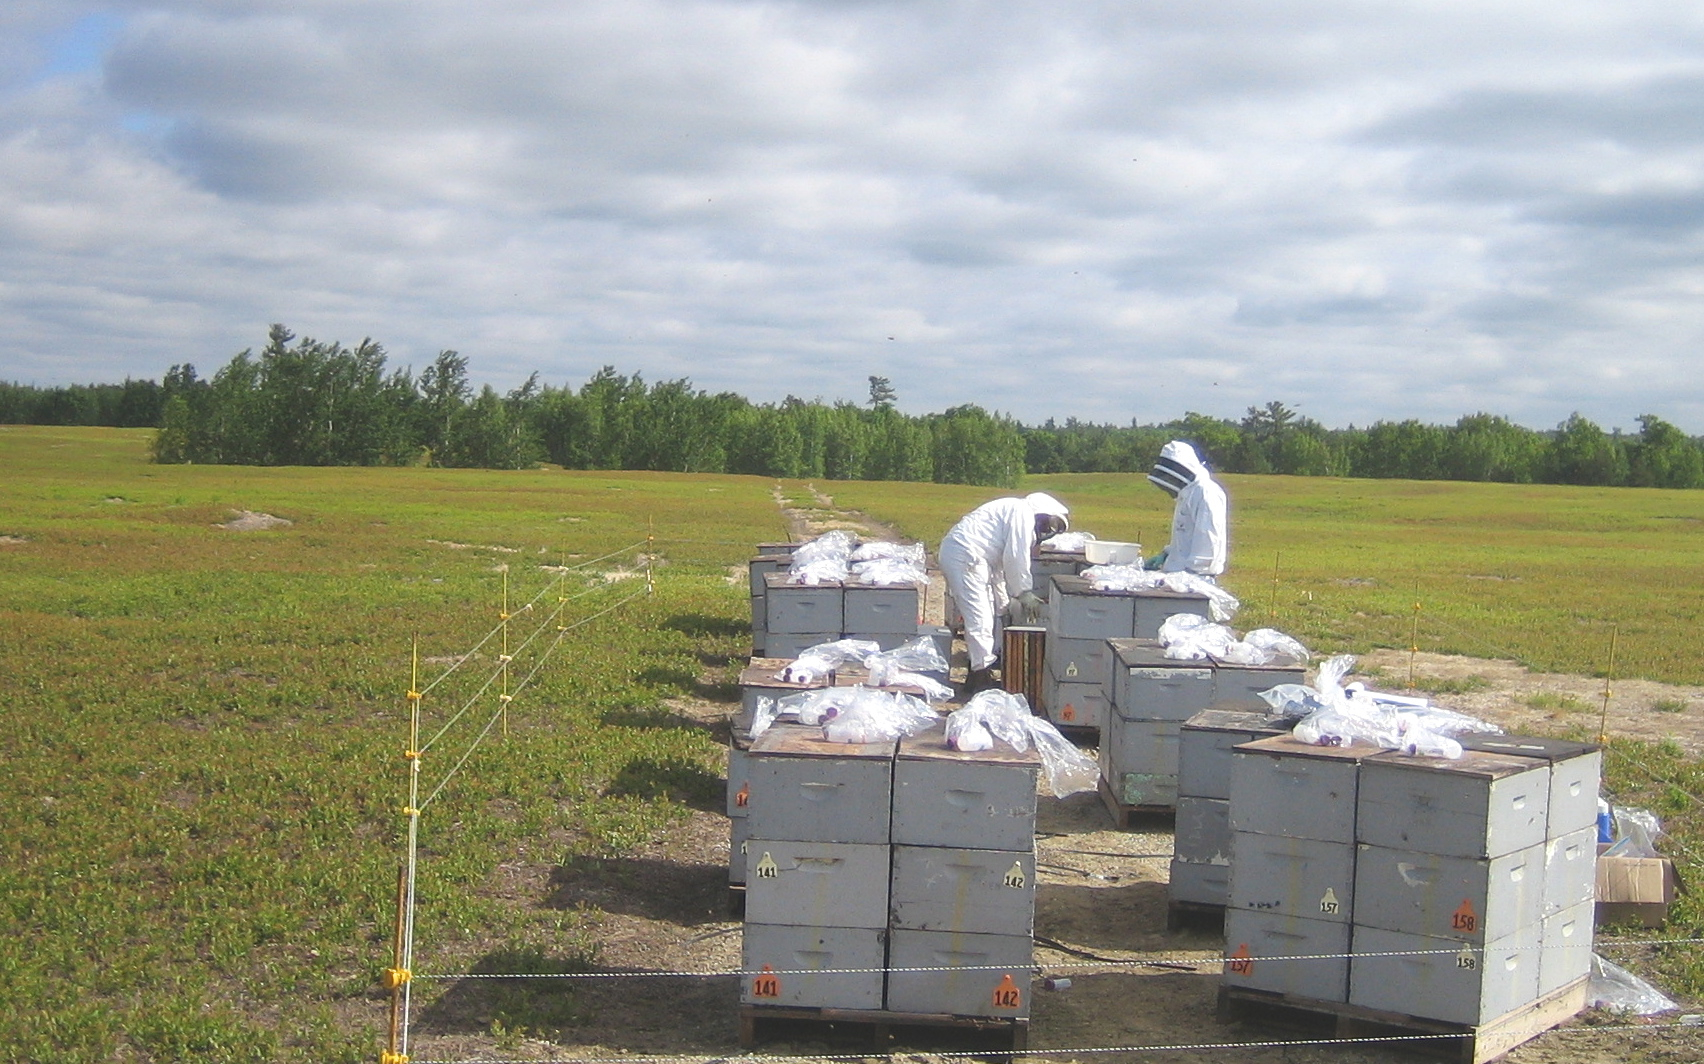 Researchers collect pollen samples from honey bee hives used to pollinate blueberries in Maine. Photo: Michael Andree